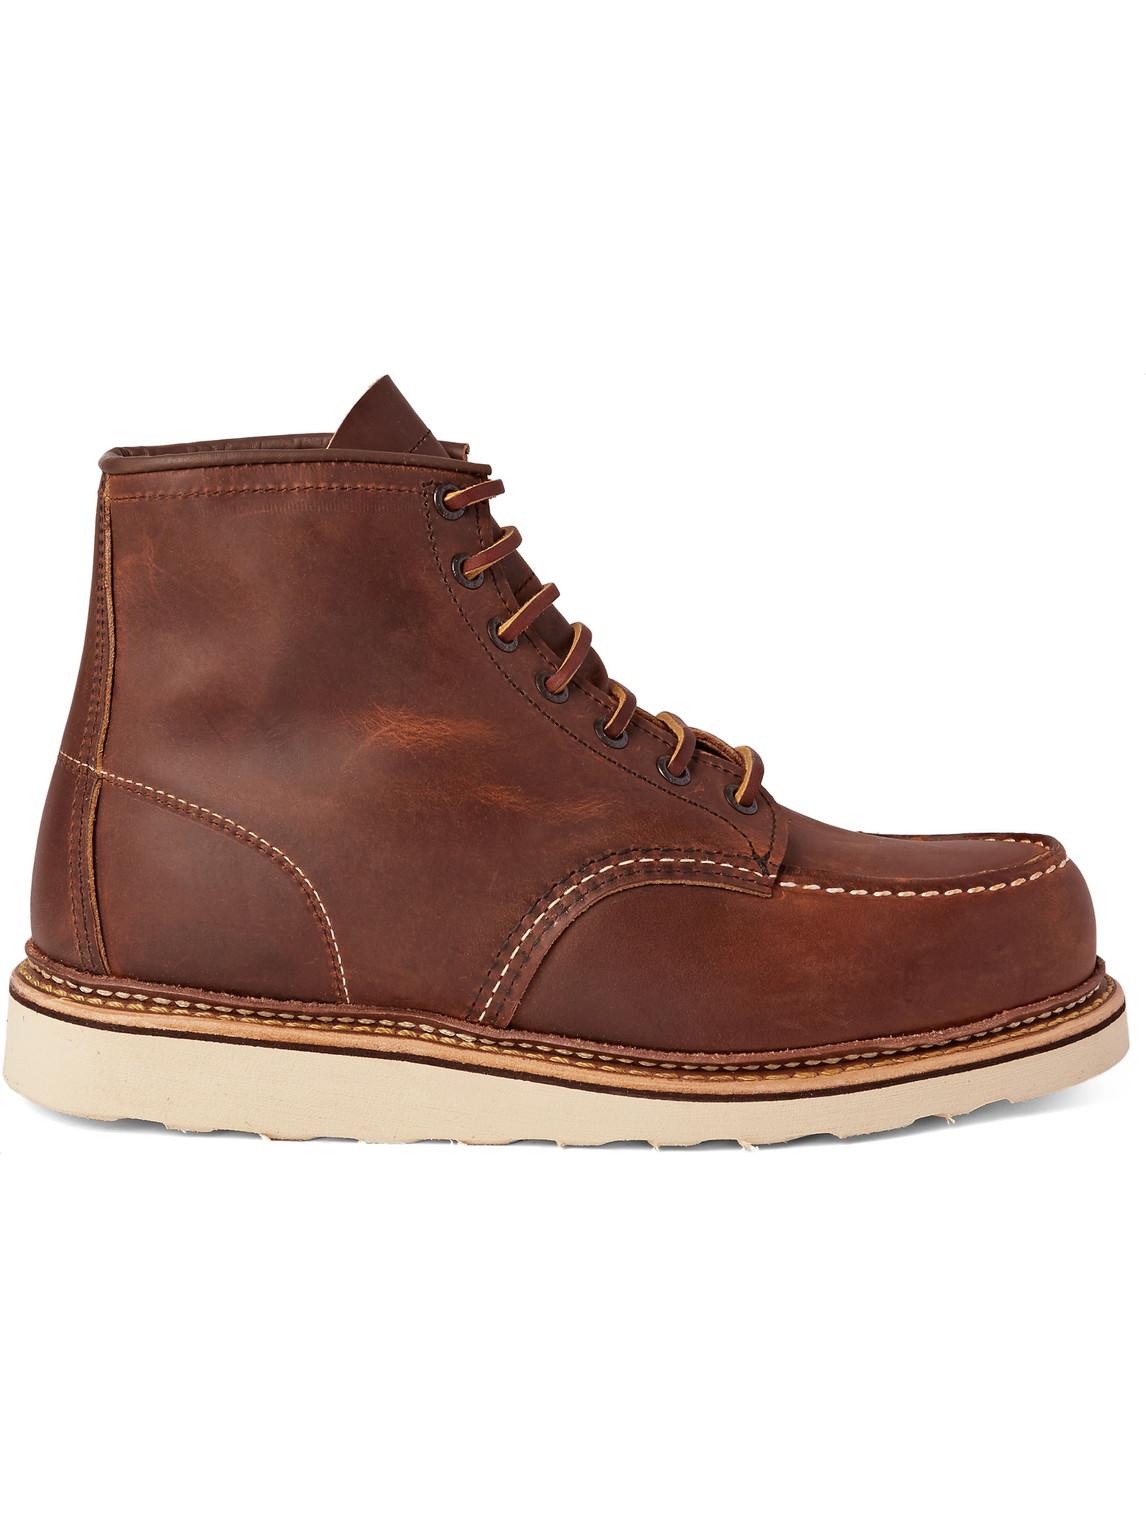 ZILLI Boots Zilli Leather For Male 8 US於男裝